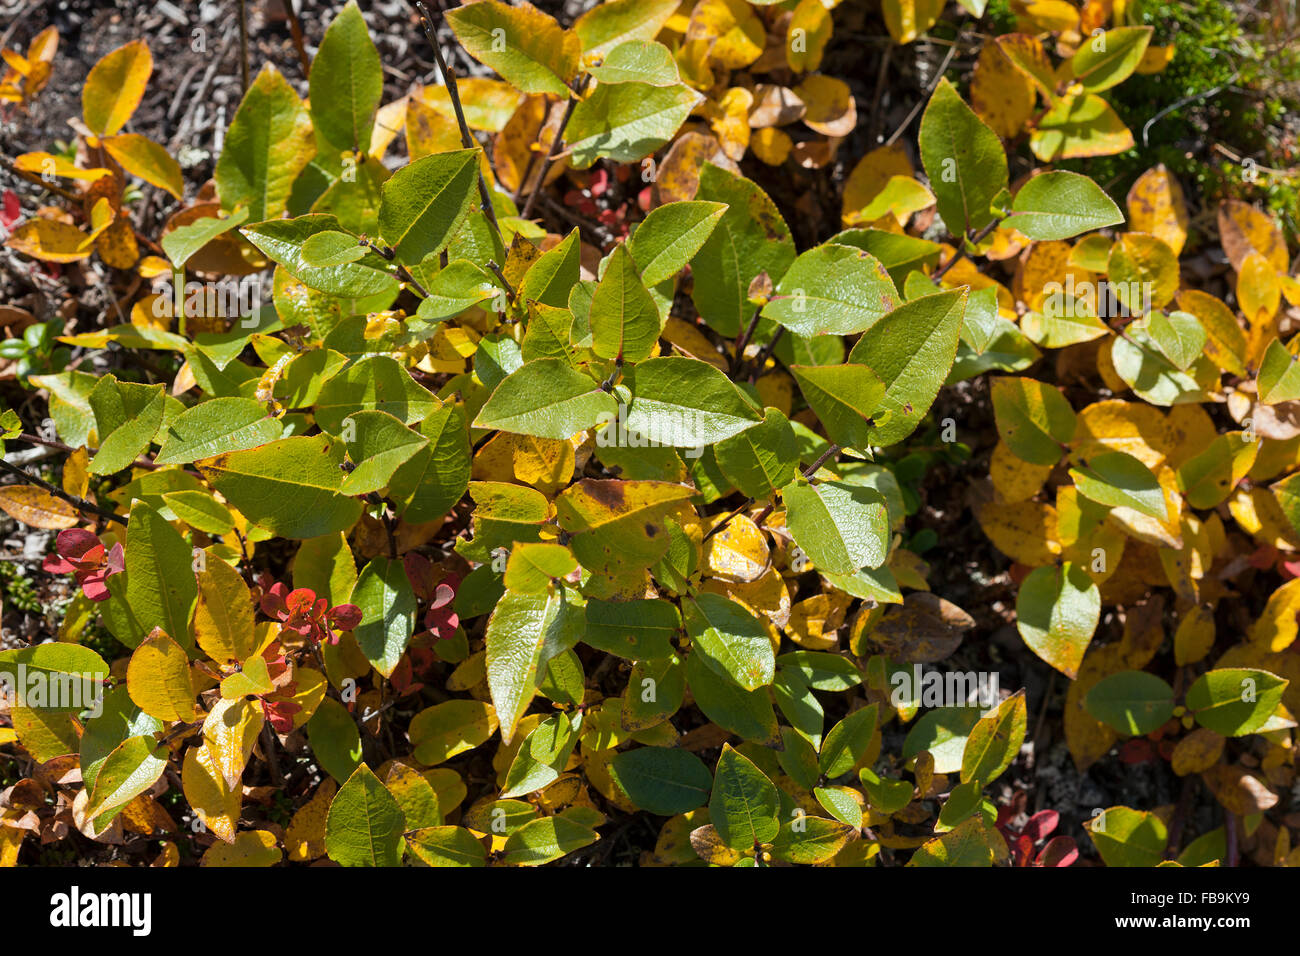 Short and overblown willow plant, Salix on the moorland. Green and yellow leaves close to the ground. Stock Photo